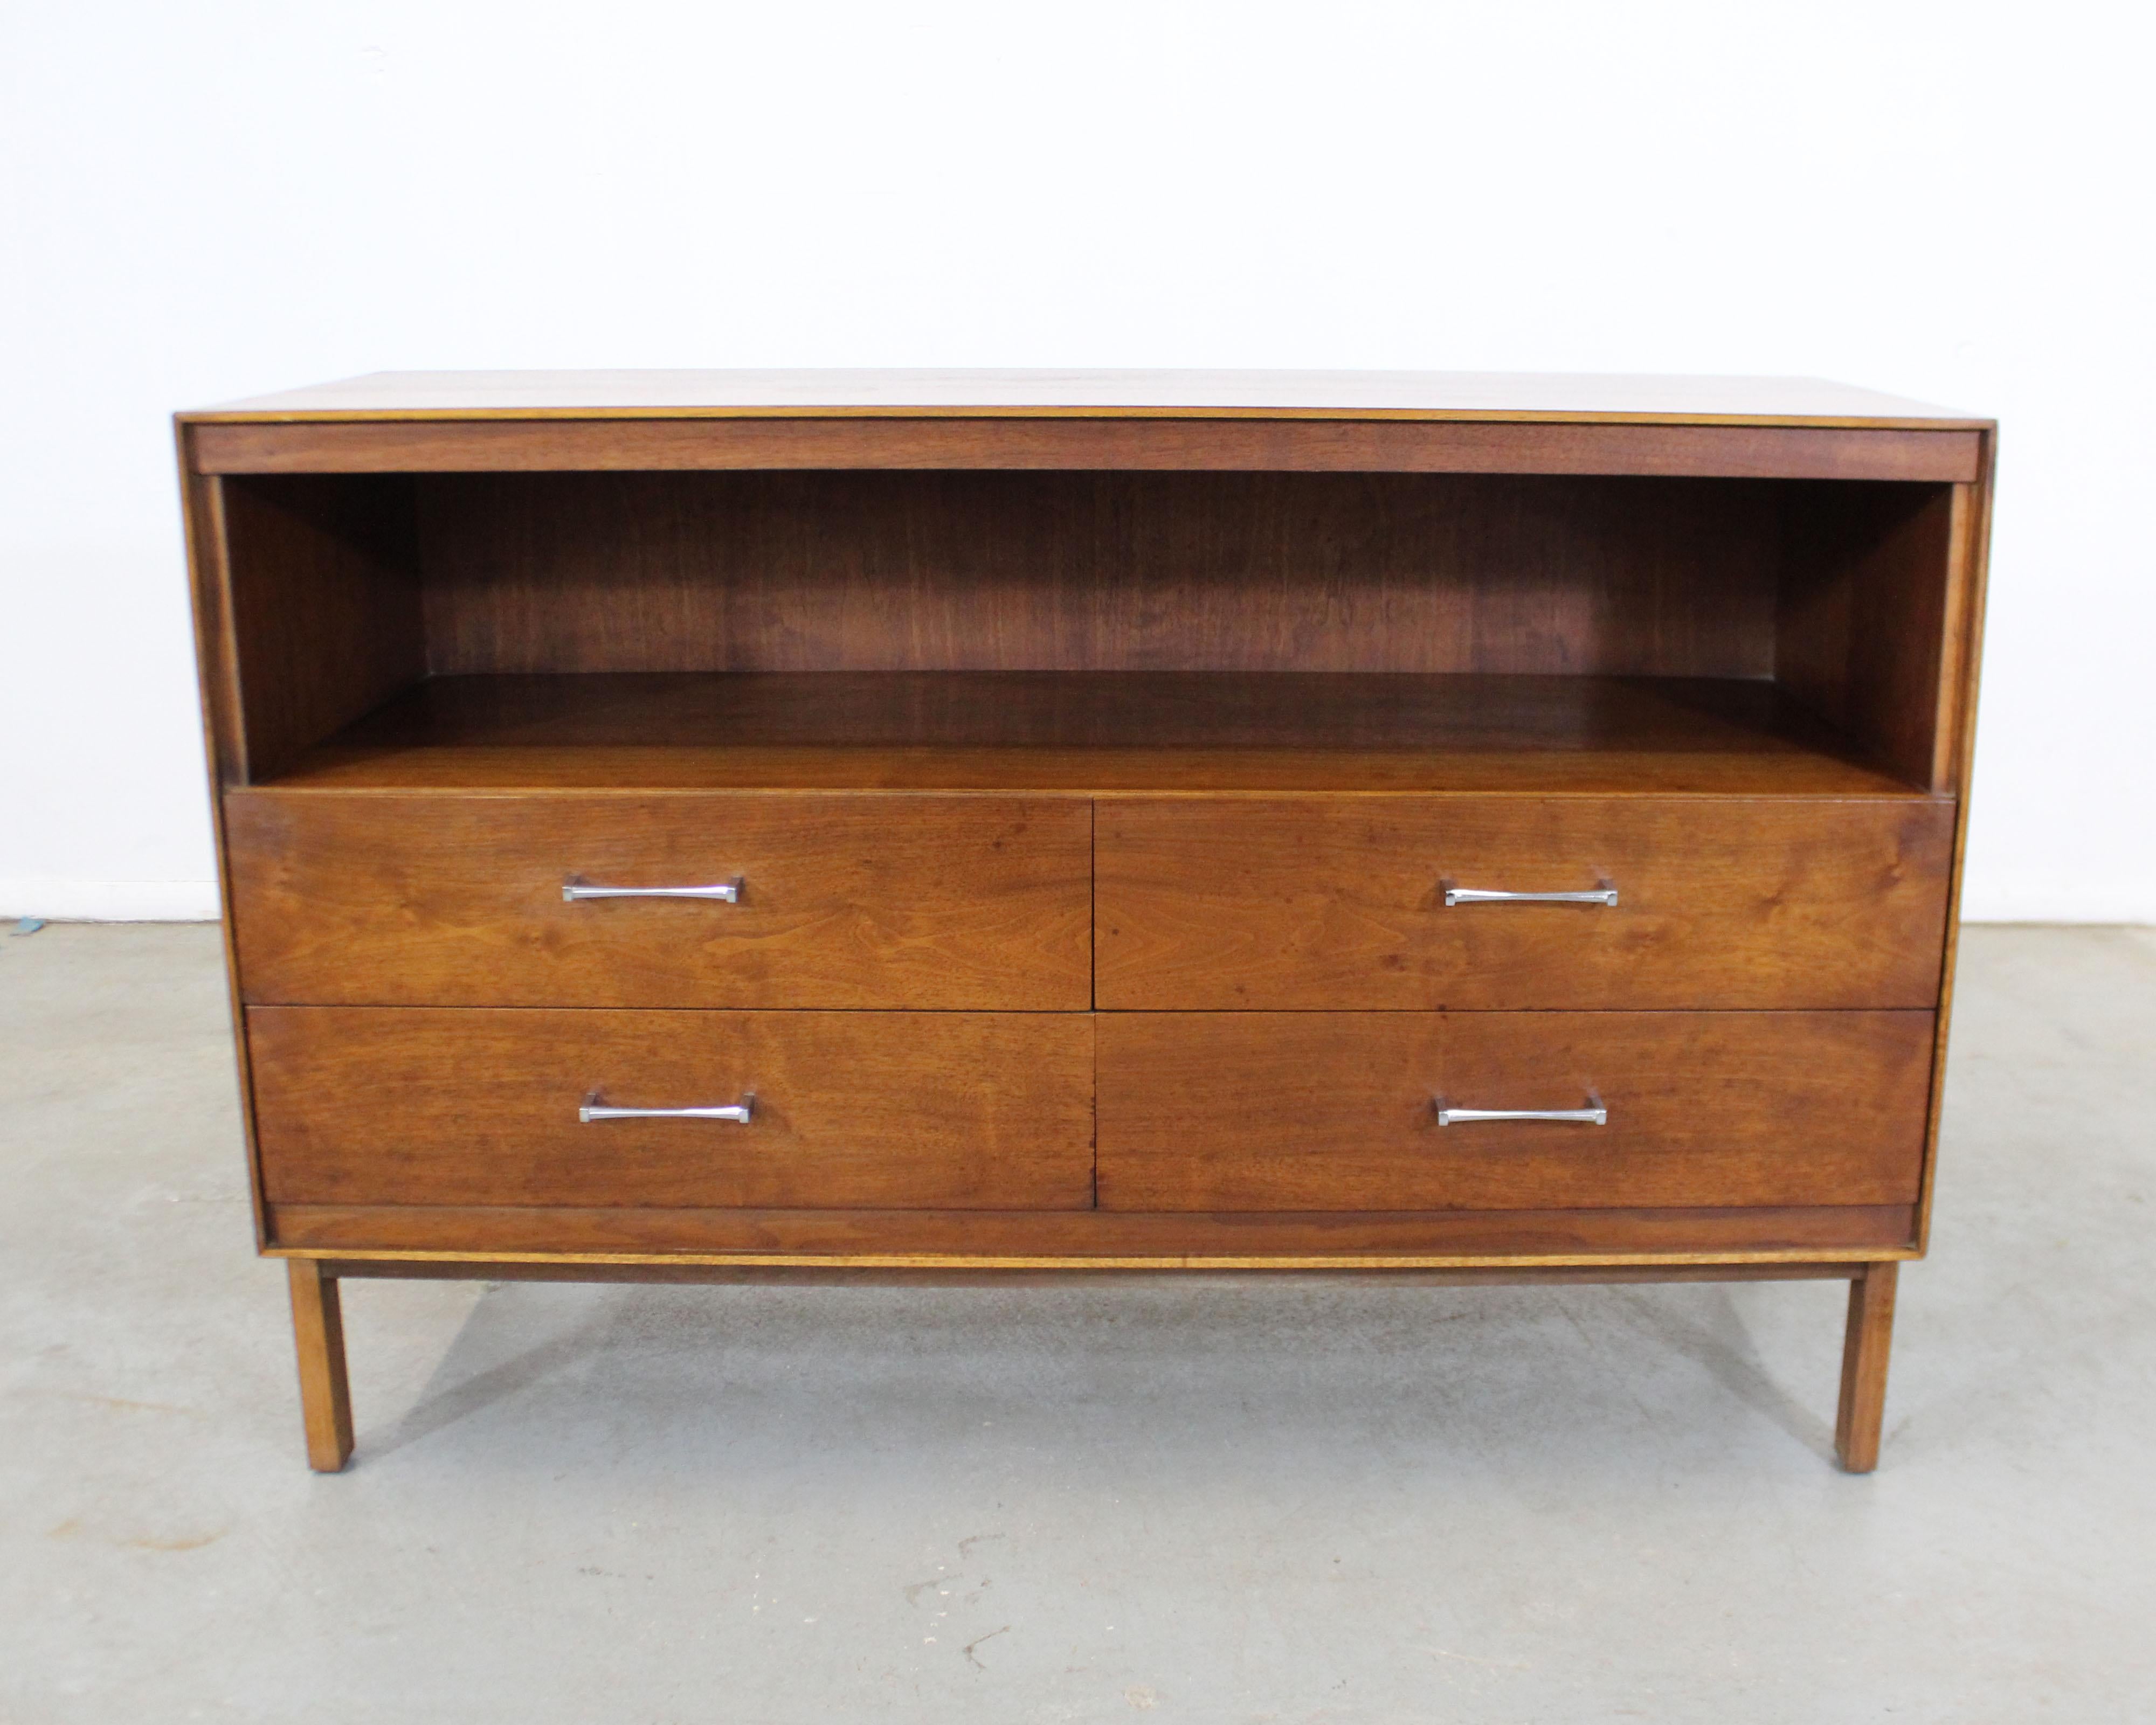 Offered is a vintage Mid-Century Modern credenza, designed by Paul McCobb for Lane Furniture's 